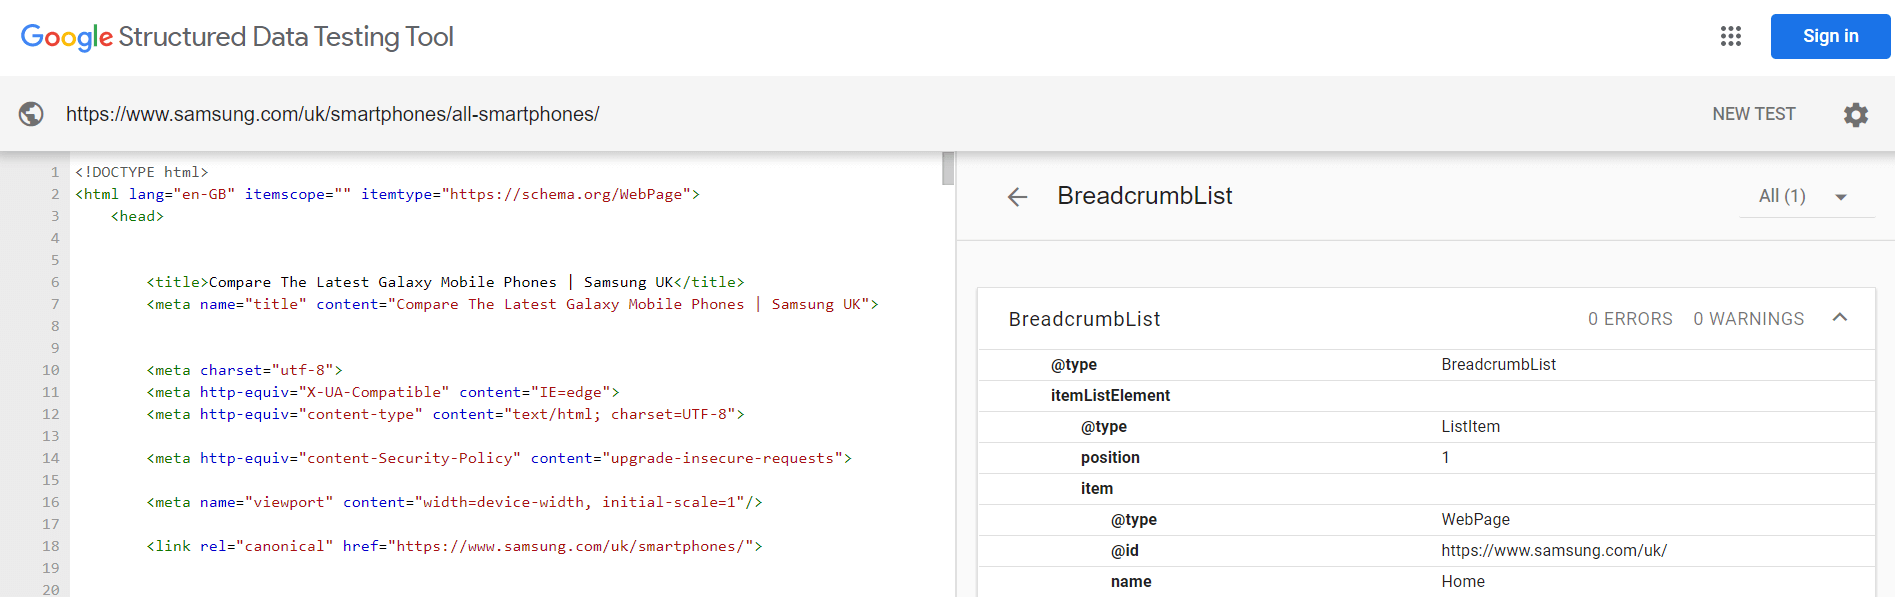 Breadcrumbs structured data testing tool